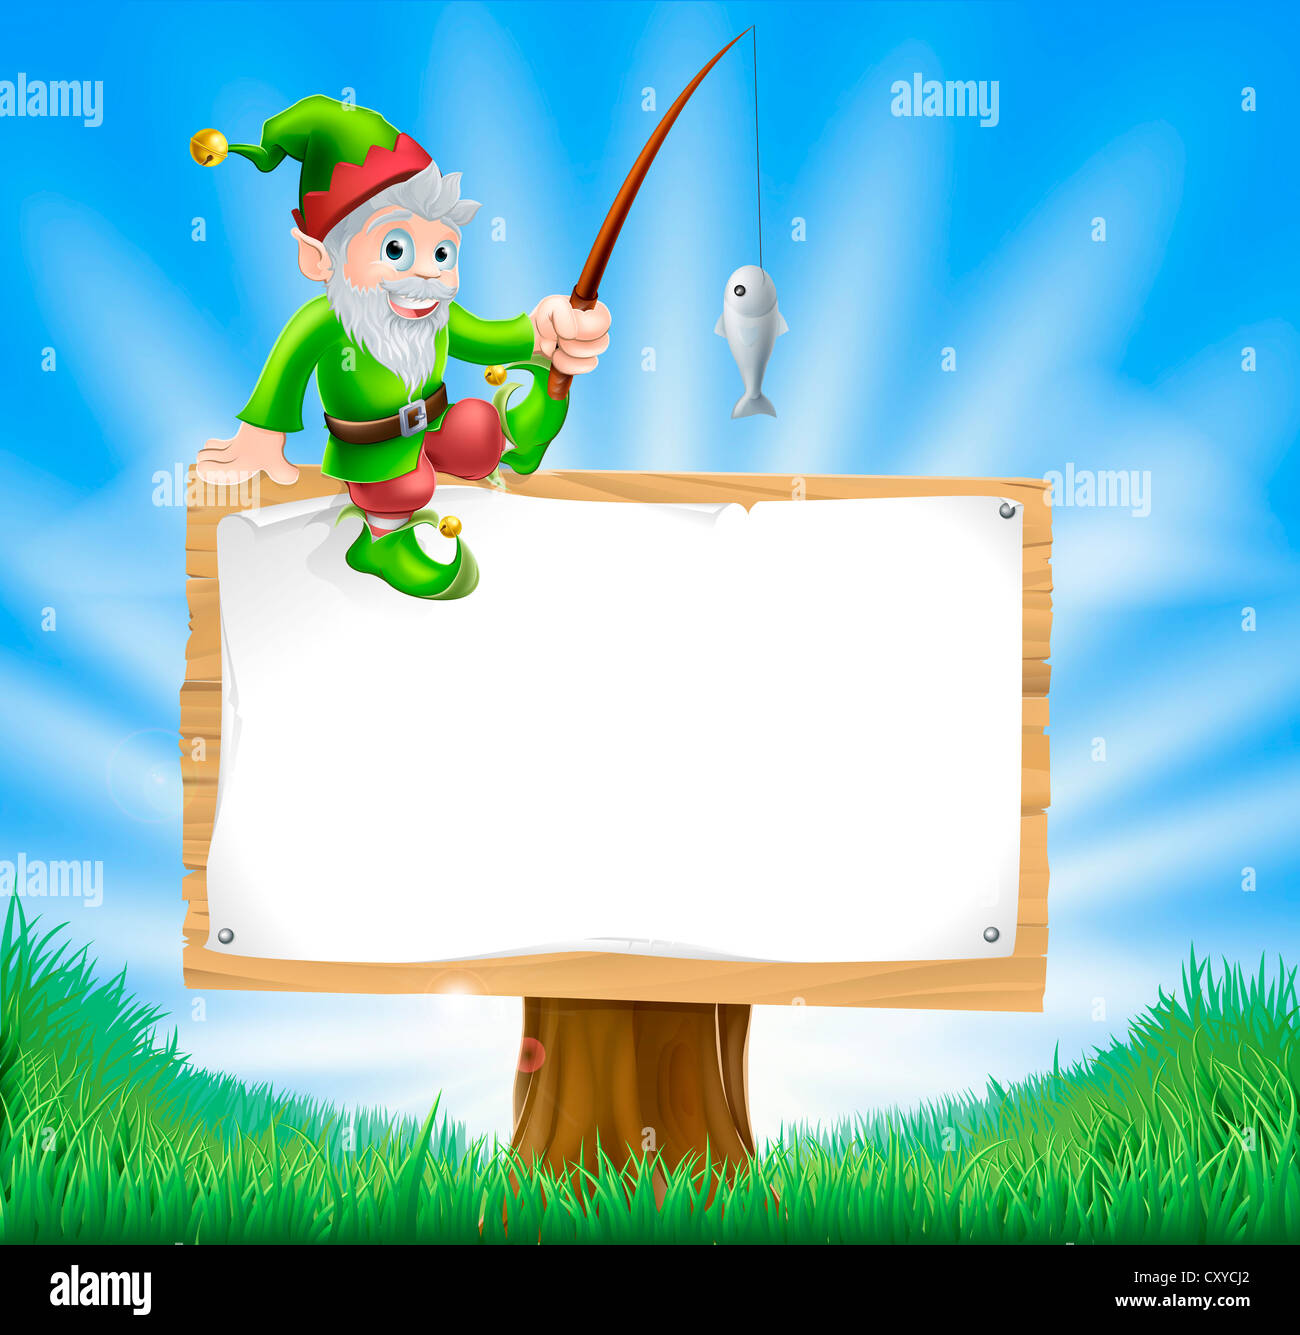 Illustration of a happy garden gnome or elf sitting on a sign holding a fishing rod Stock Photo